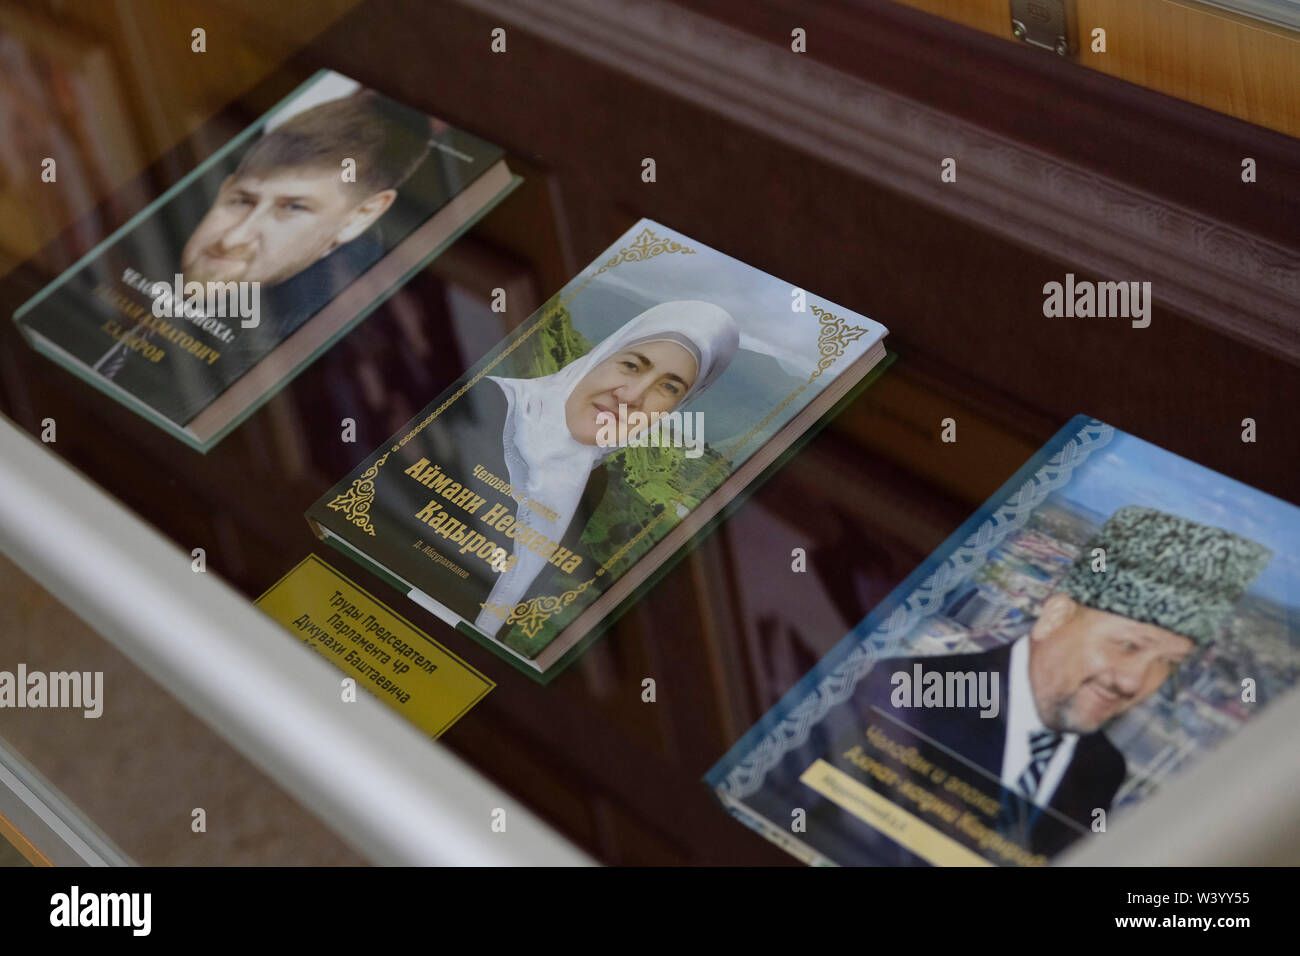 Books written by Kadyrov family displayed at Akhmat Kadyrov museum overwhelmingly a shrine to Akhmat and Ramzan Kadyrov in Grozny the capital city of Chechnya in the North Caucasian Federal District of Russia. Stock Photo